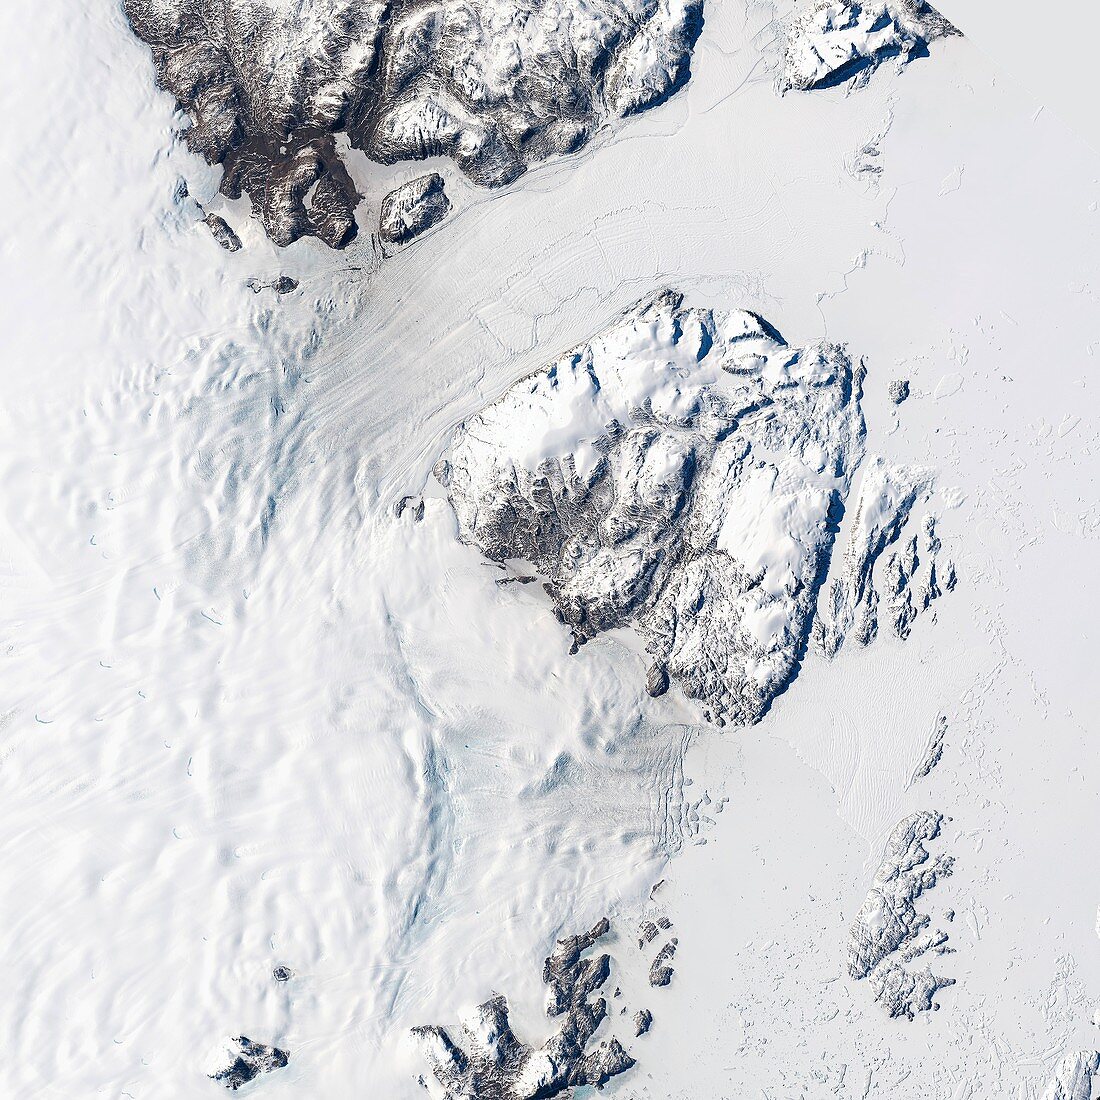 Melting Greenland glaciers,August 2014